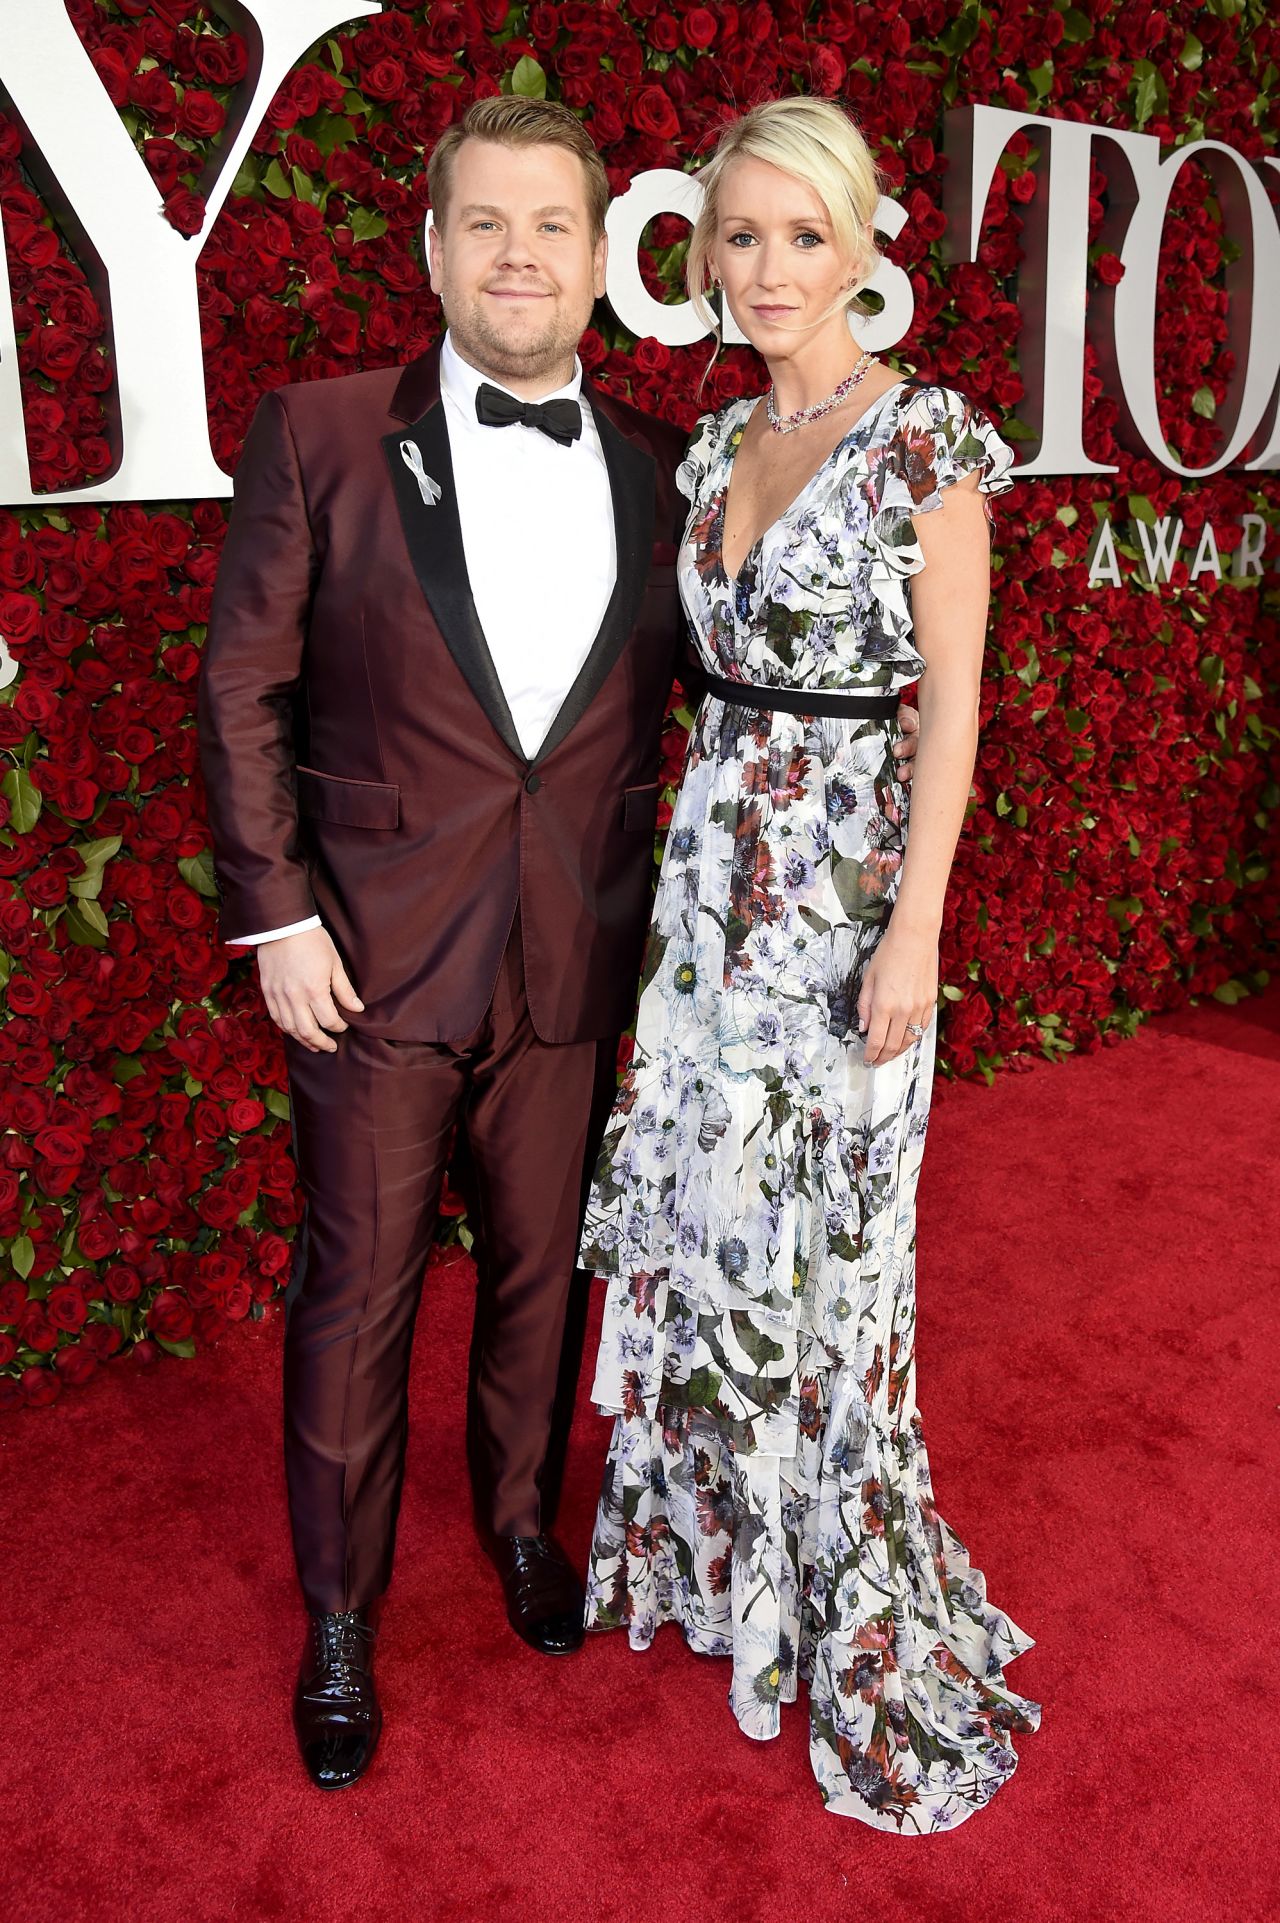 Host James Corden and his wife, Julia Carey, attend the 70th Annual Tony Awards at the Beacon Theater on Sunday, June 12, in New York.  